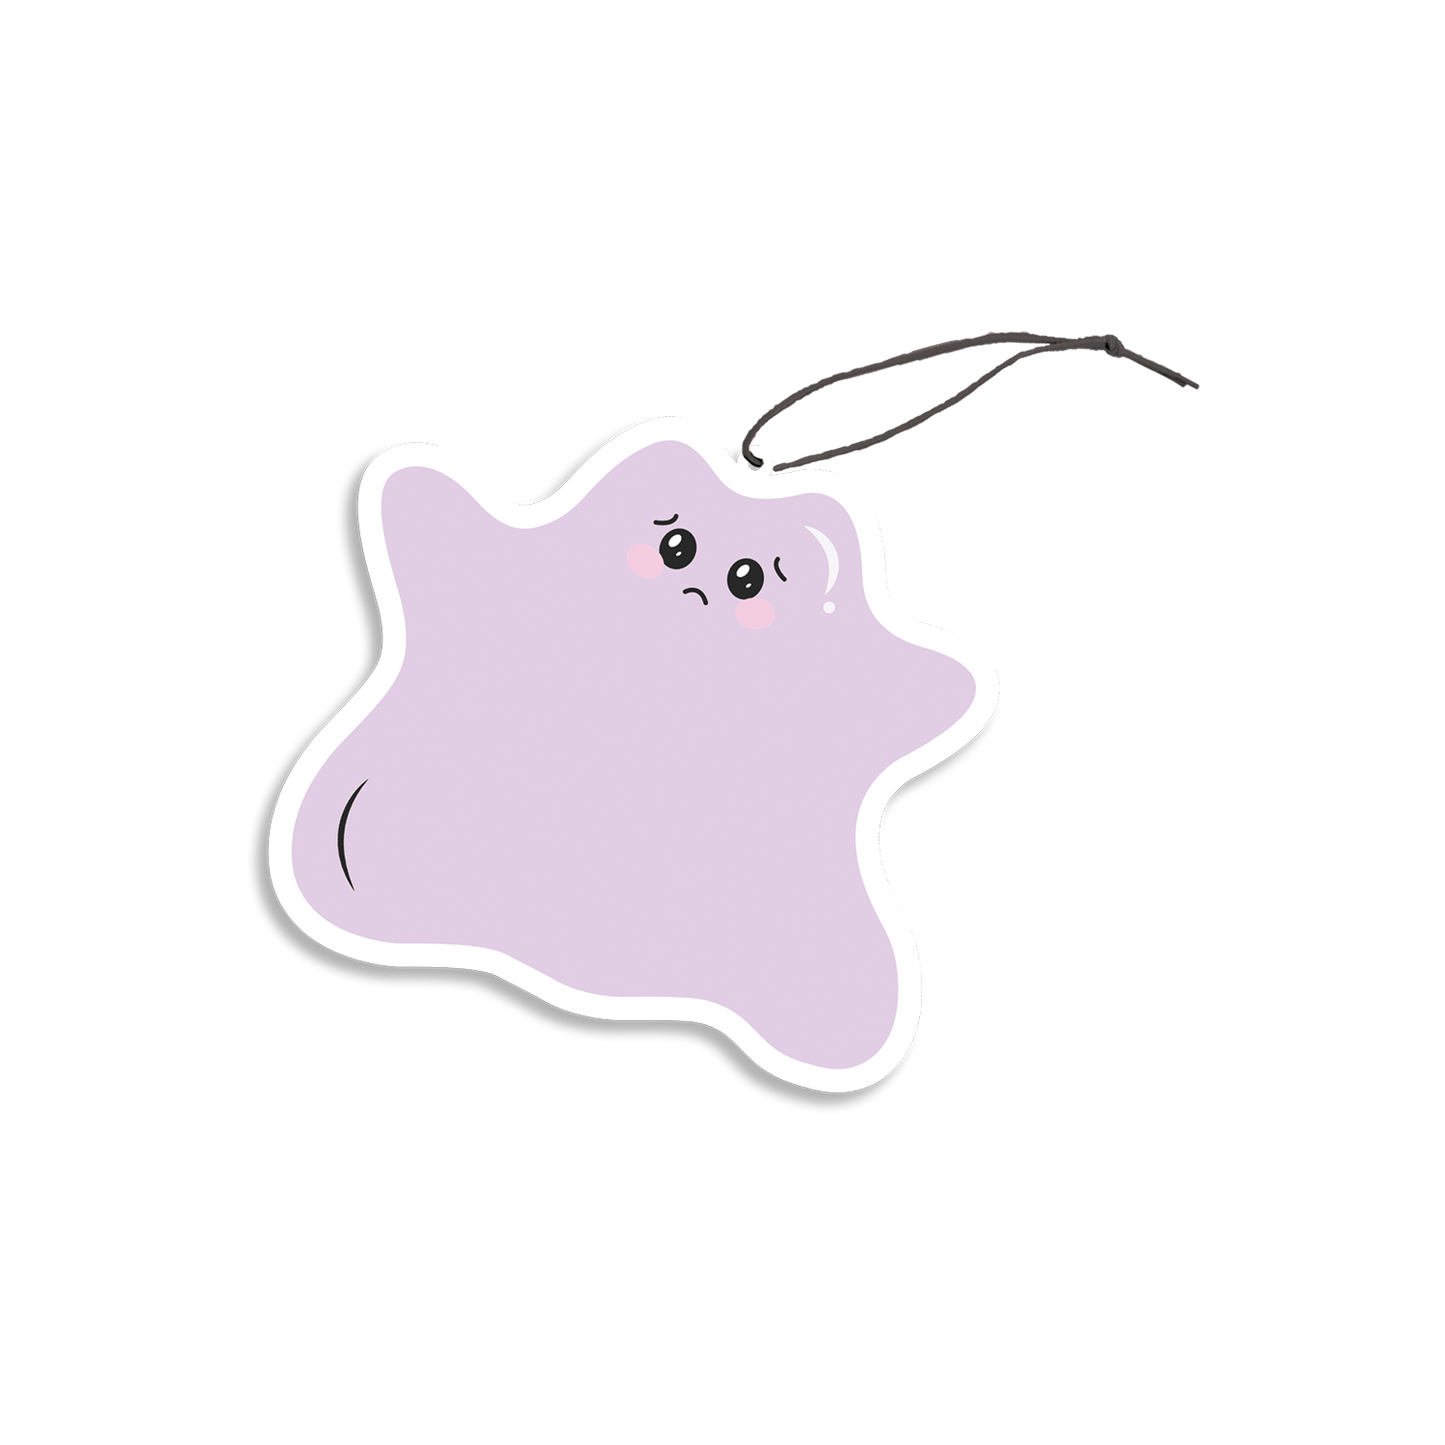 Crybaby Ditto Air Freshener design features Ditto Pokemon looking sad.